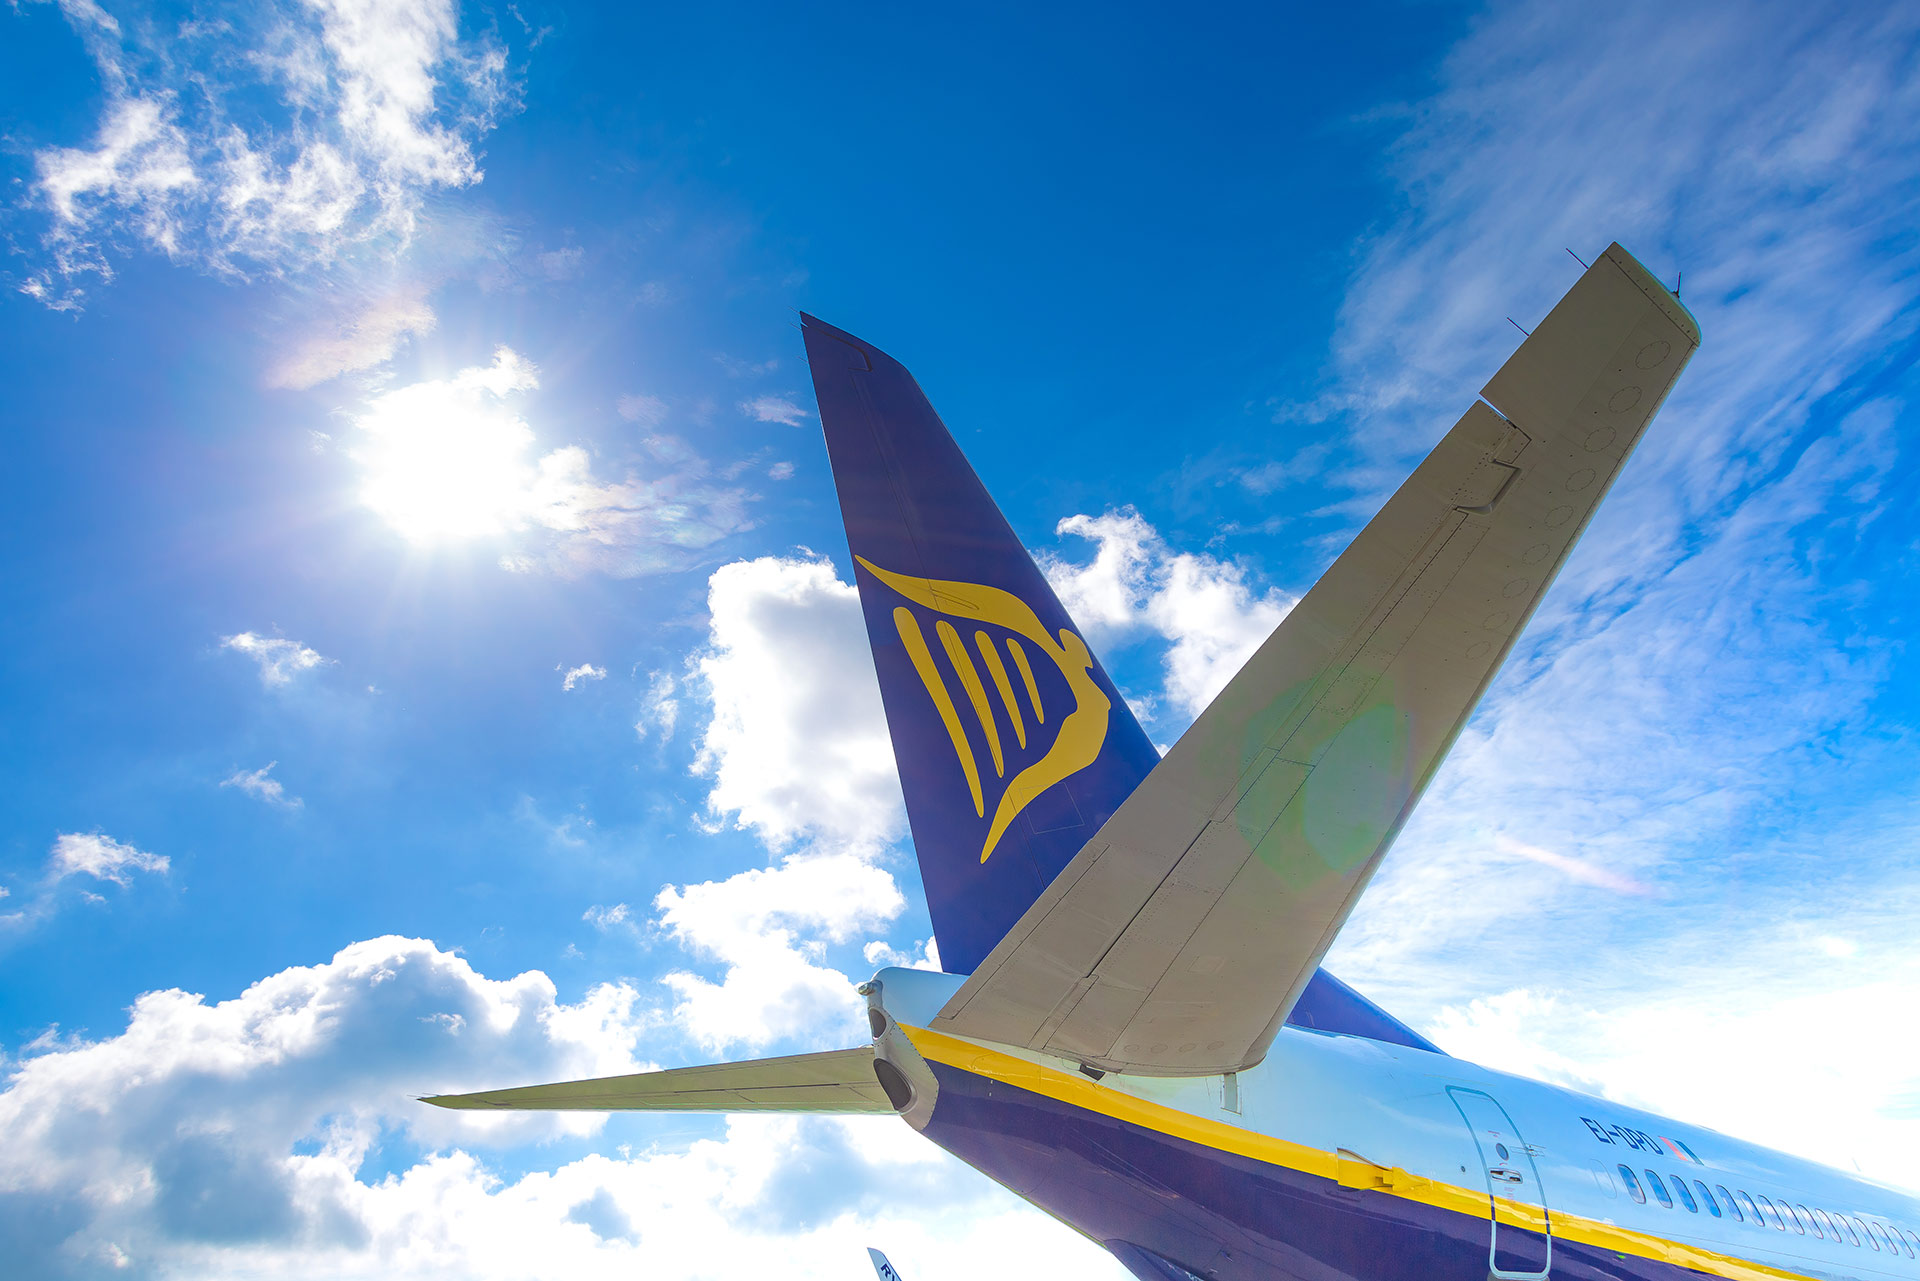 92% Of Ryanair Flights Arrived On Time In July (Excl ATC)